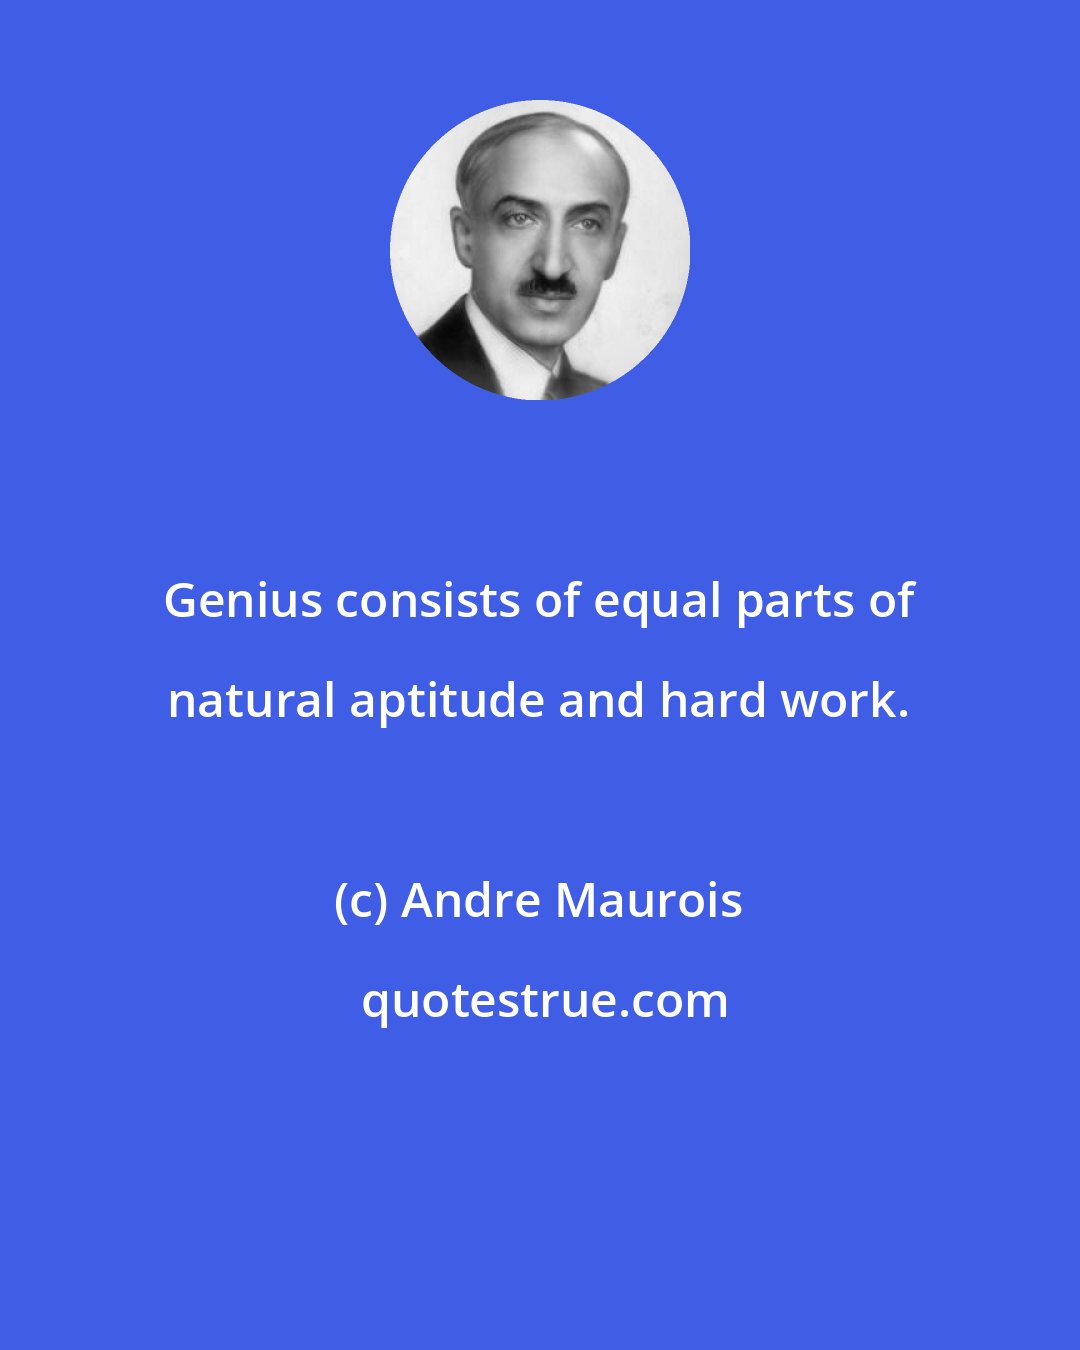 Andre Maurois: Genius consists of equal parts of natural aptitude and hard work.